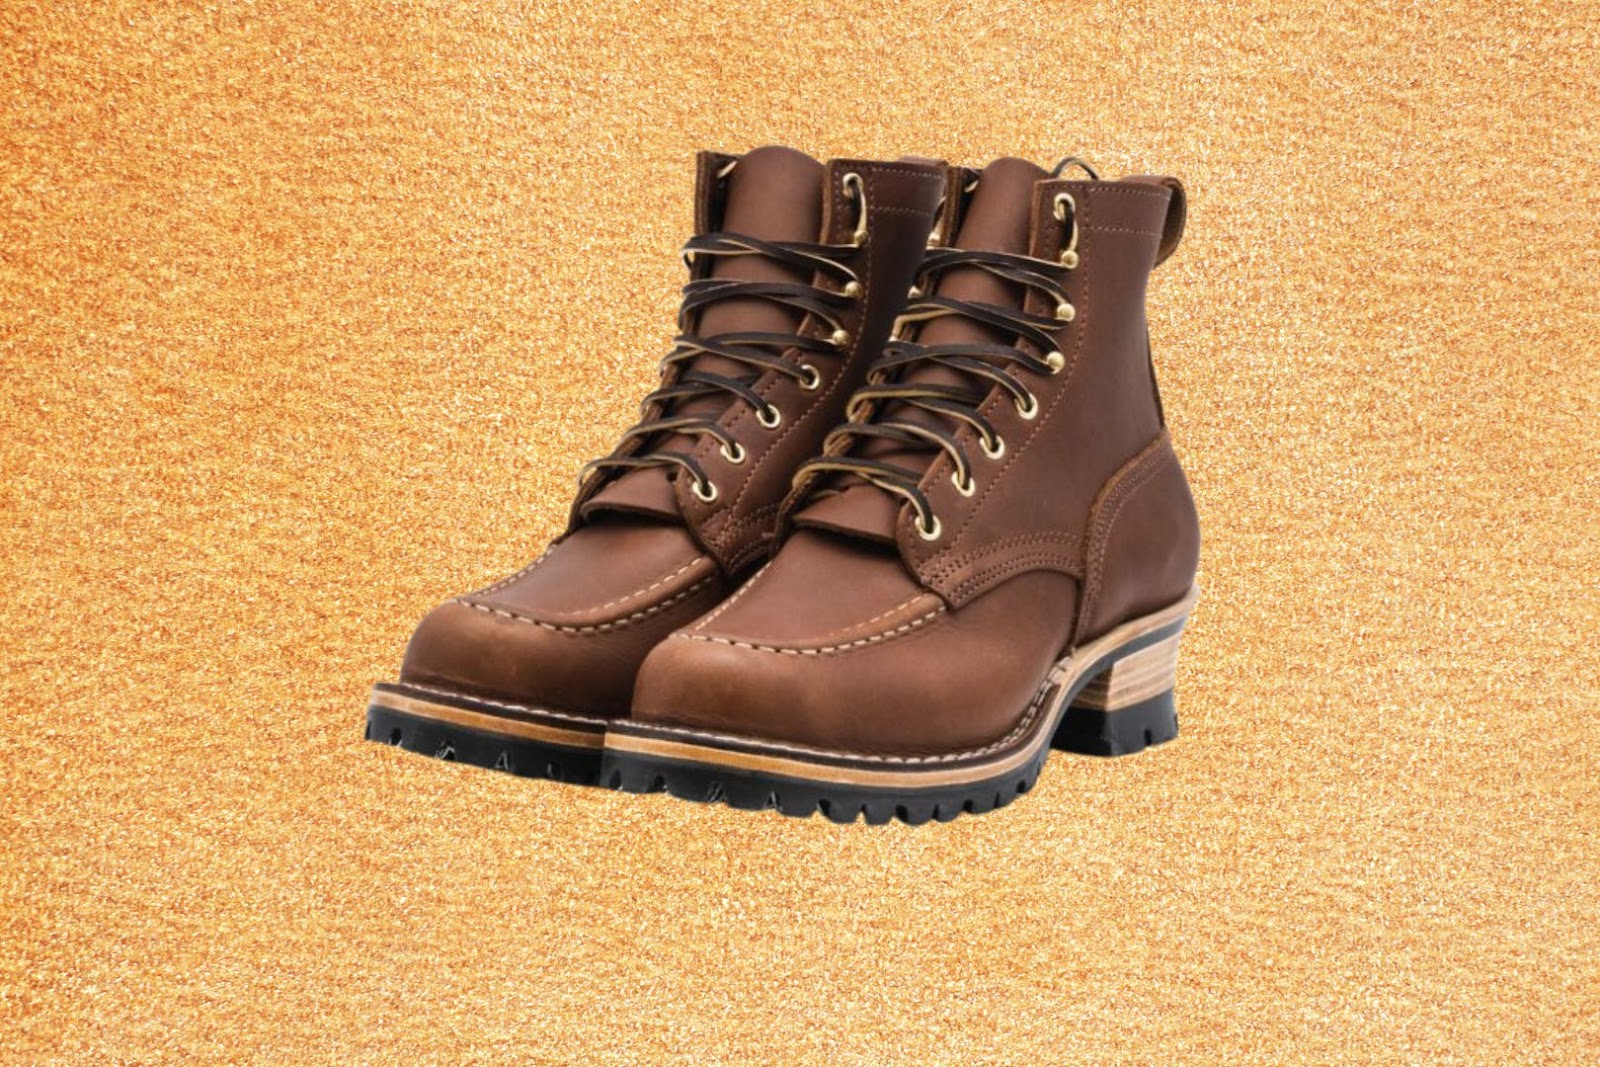 What Are Logger Boots